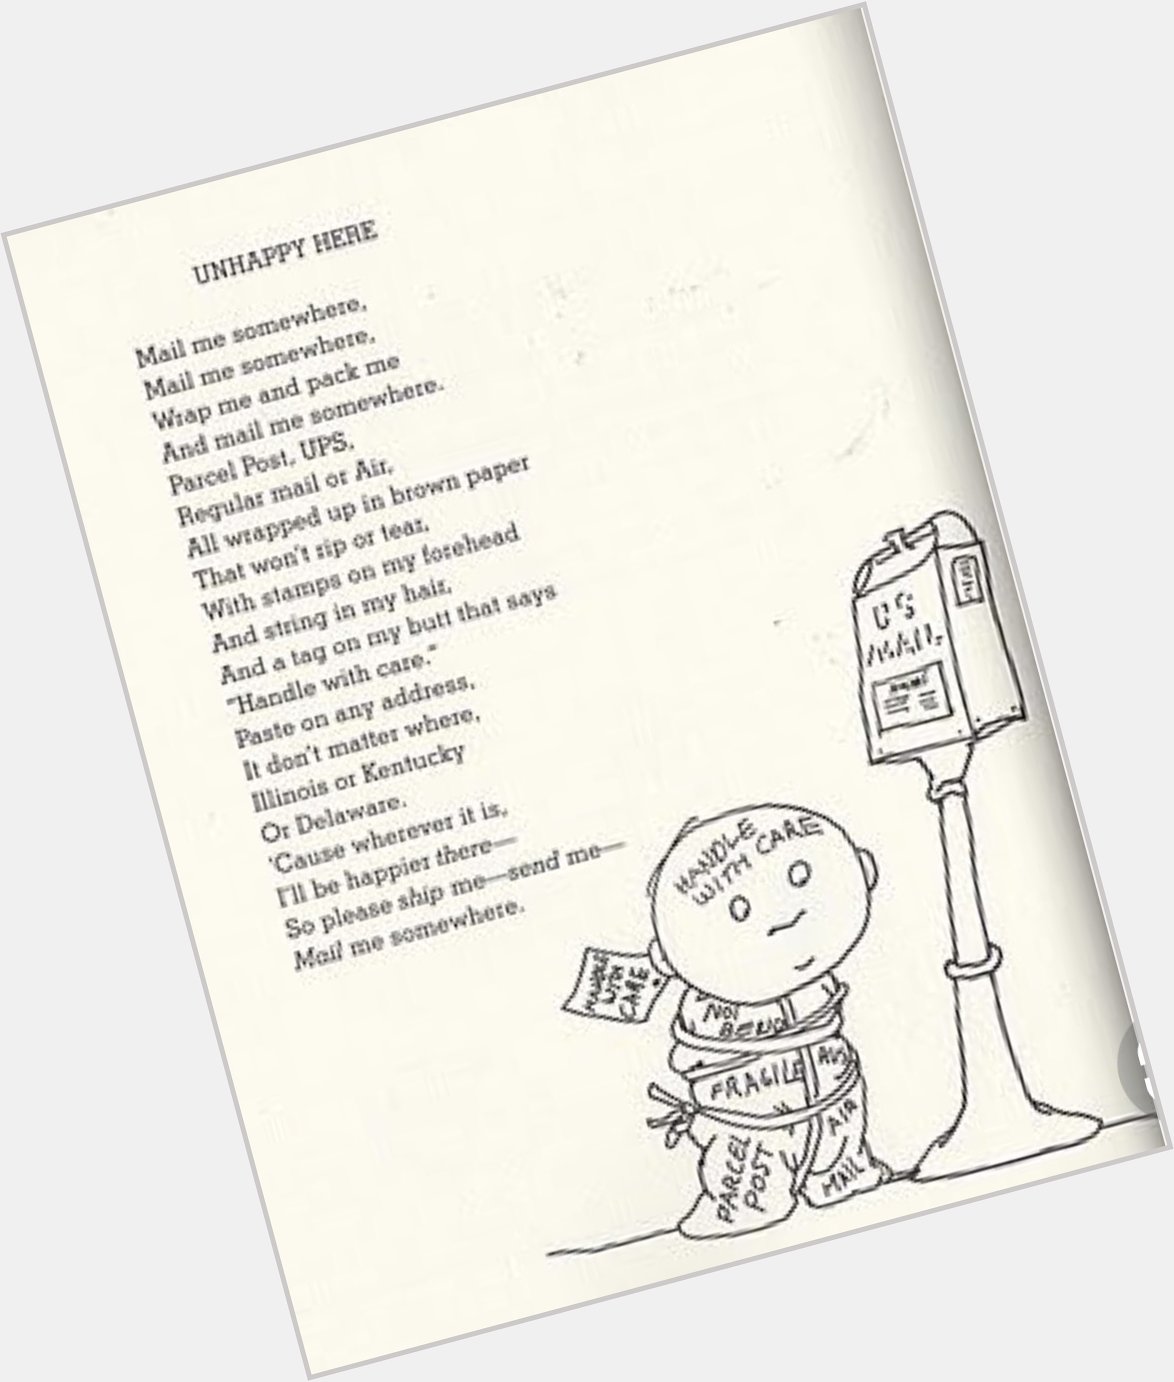 Happy Birthday to Shel Silverstein, thank you for your works <3 